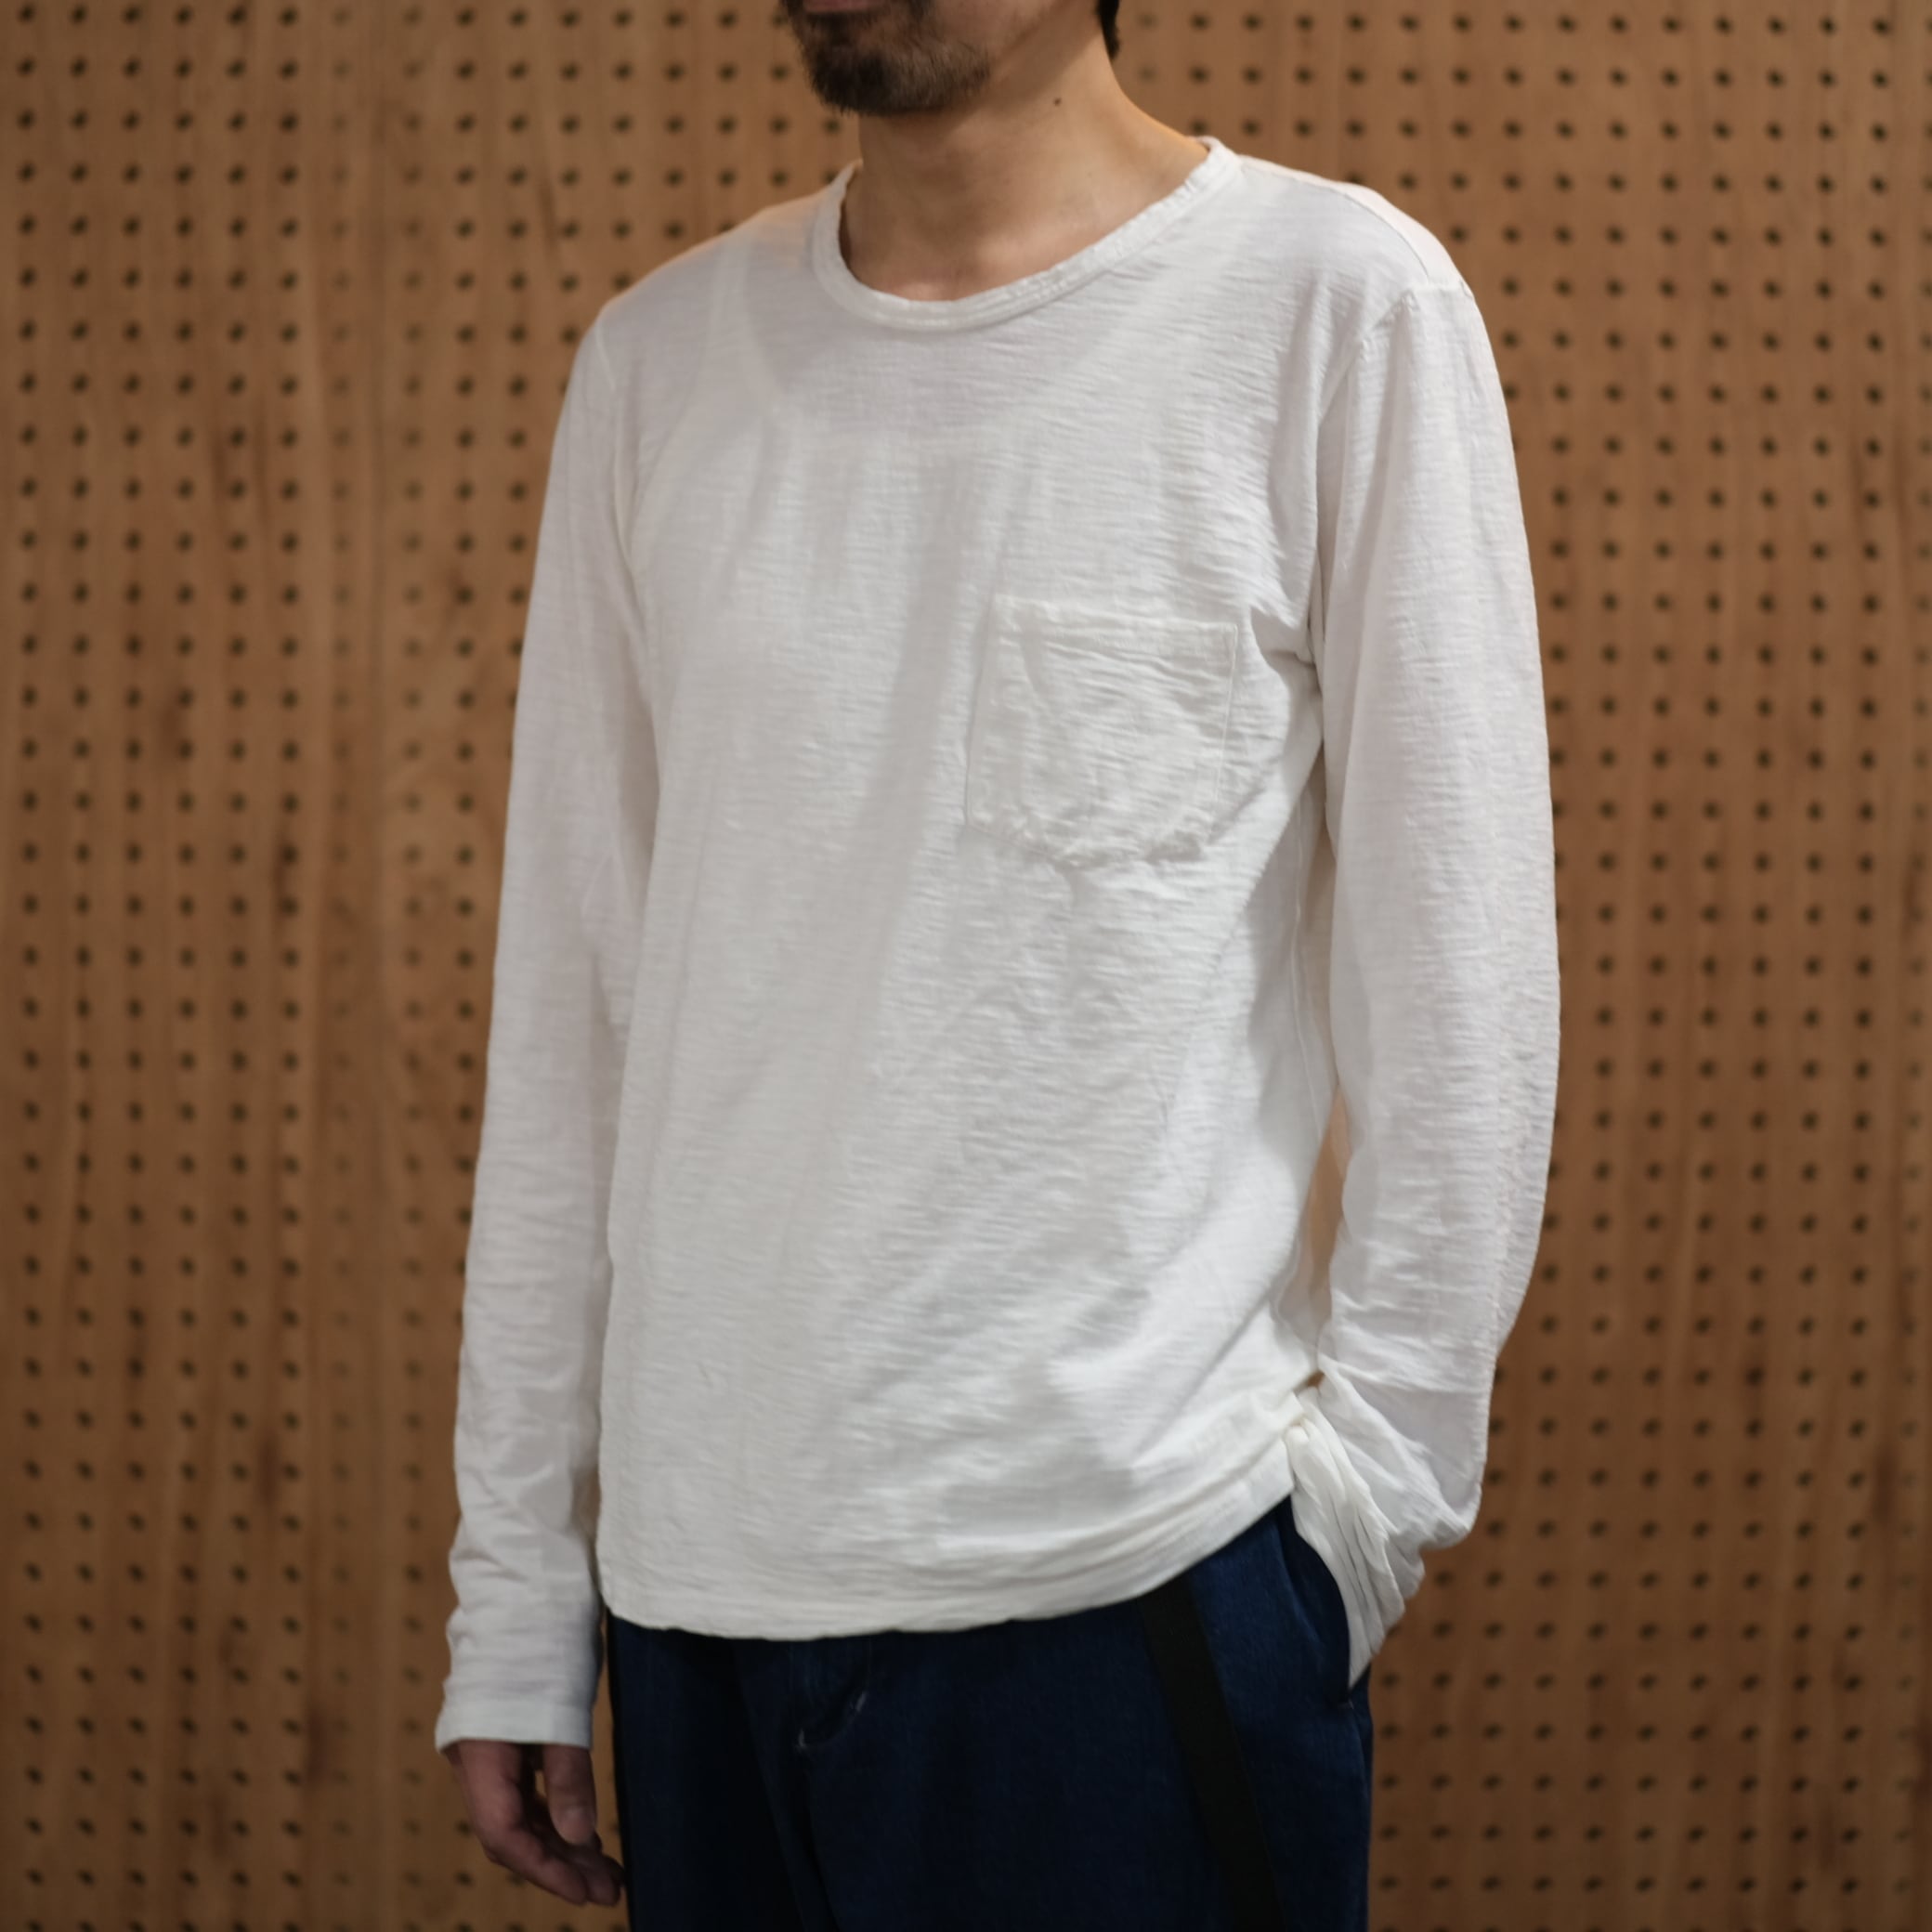 Schiesser Revival（シーサーリバイバル）hanno shirt 1/1 crew neck -nature- #158293-400  | roamers and seekers